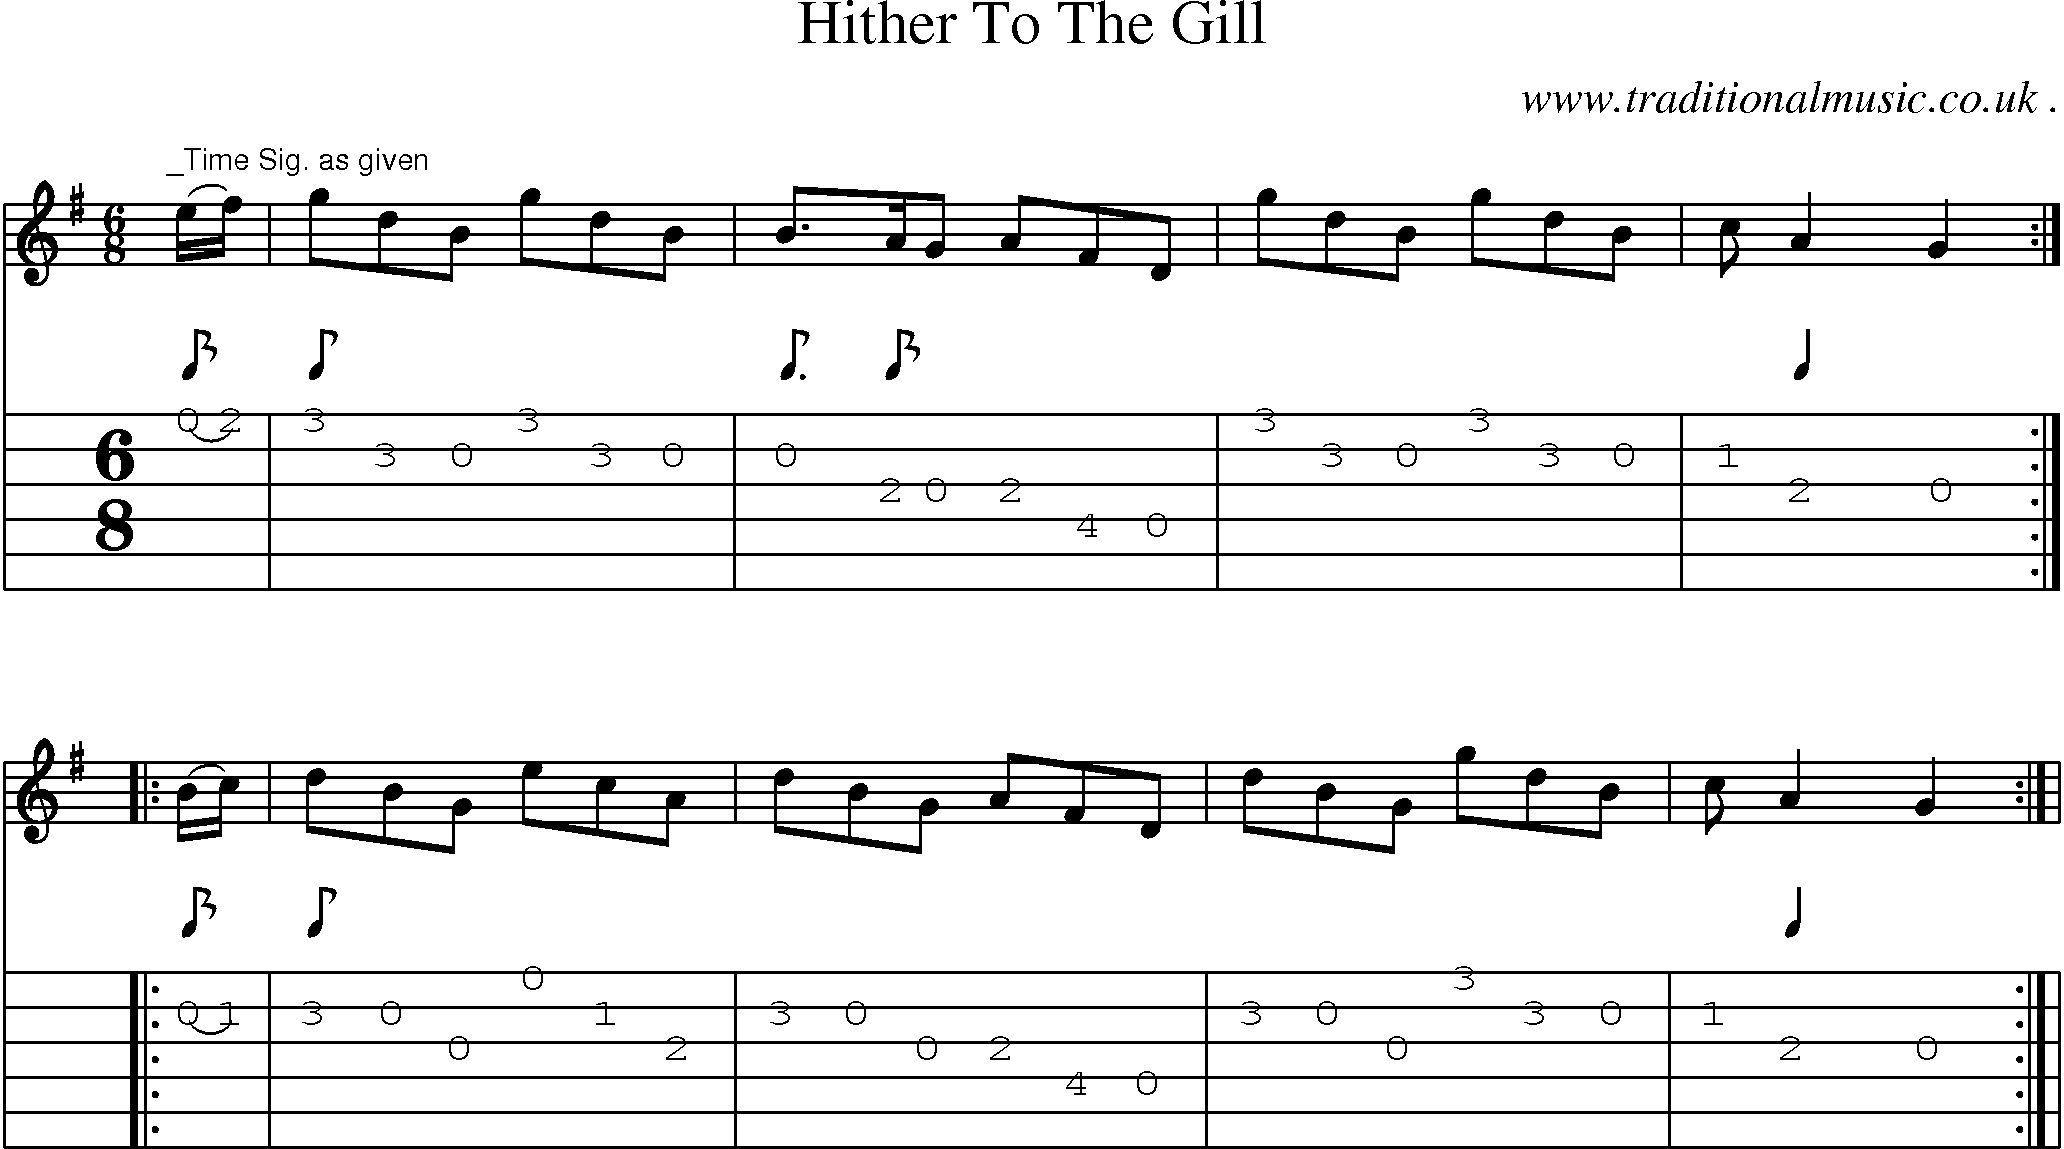 Sheet-Music and Guitar Tabs for Hither To The Gill